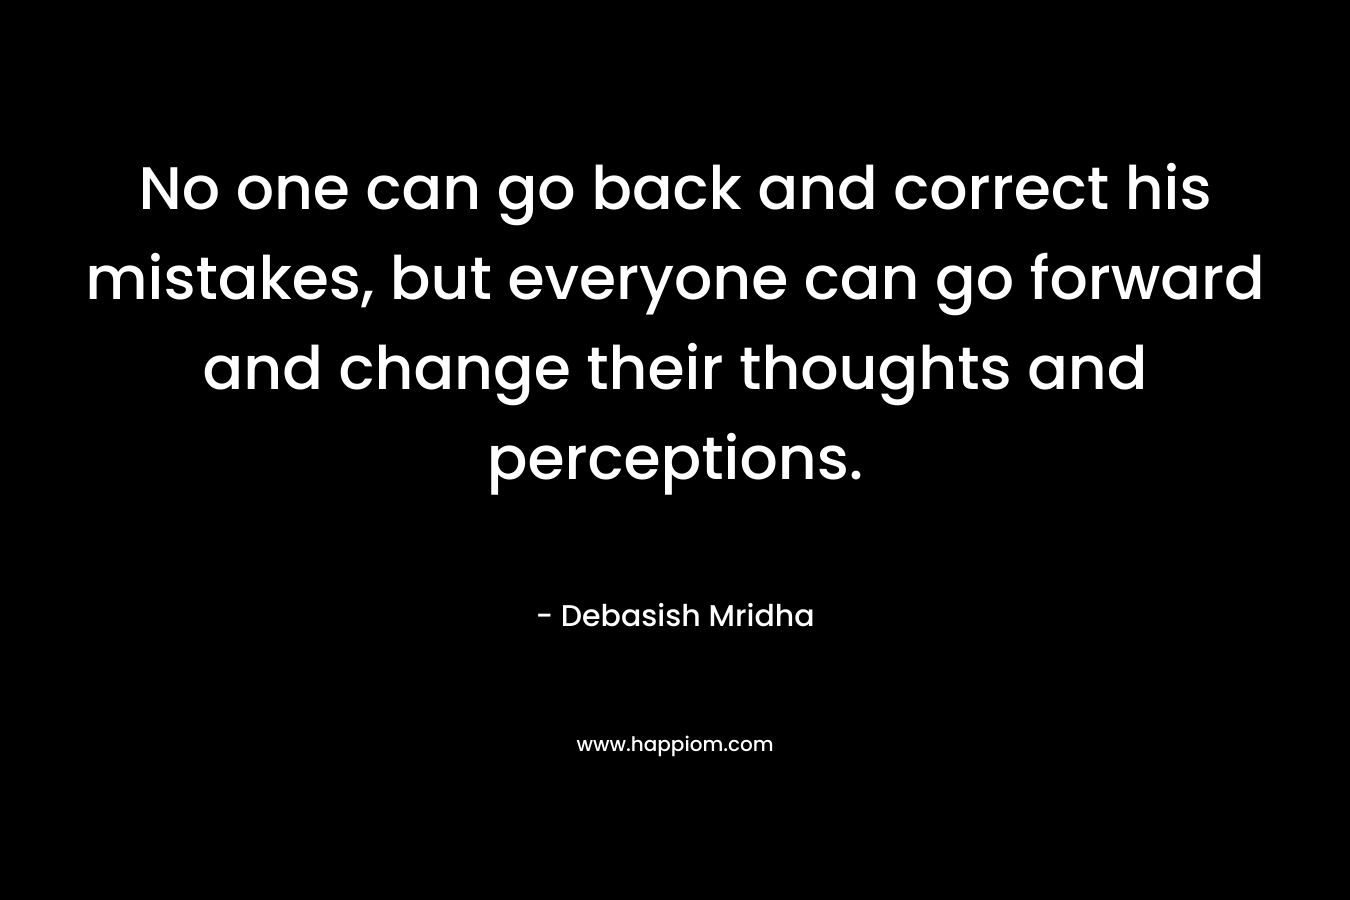 No one can go back and correct his mistakes, but everyone can go forward and change their thoughts and perceptions. – Debasish Mridha